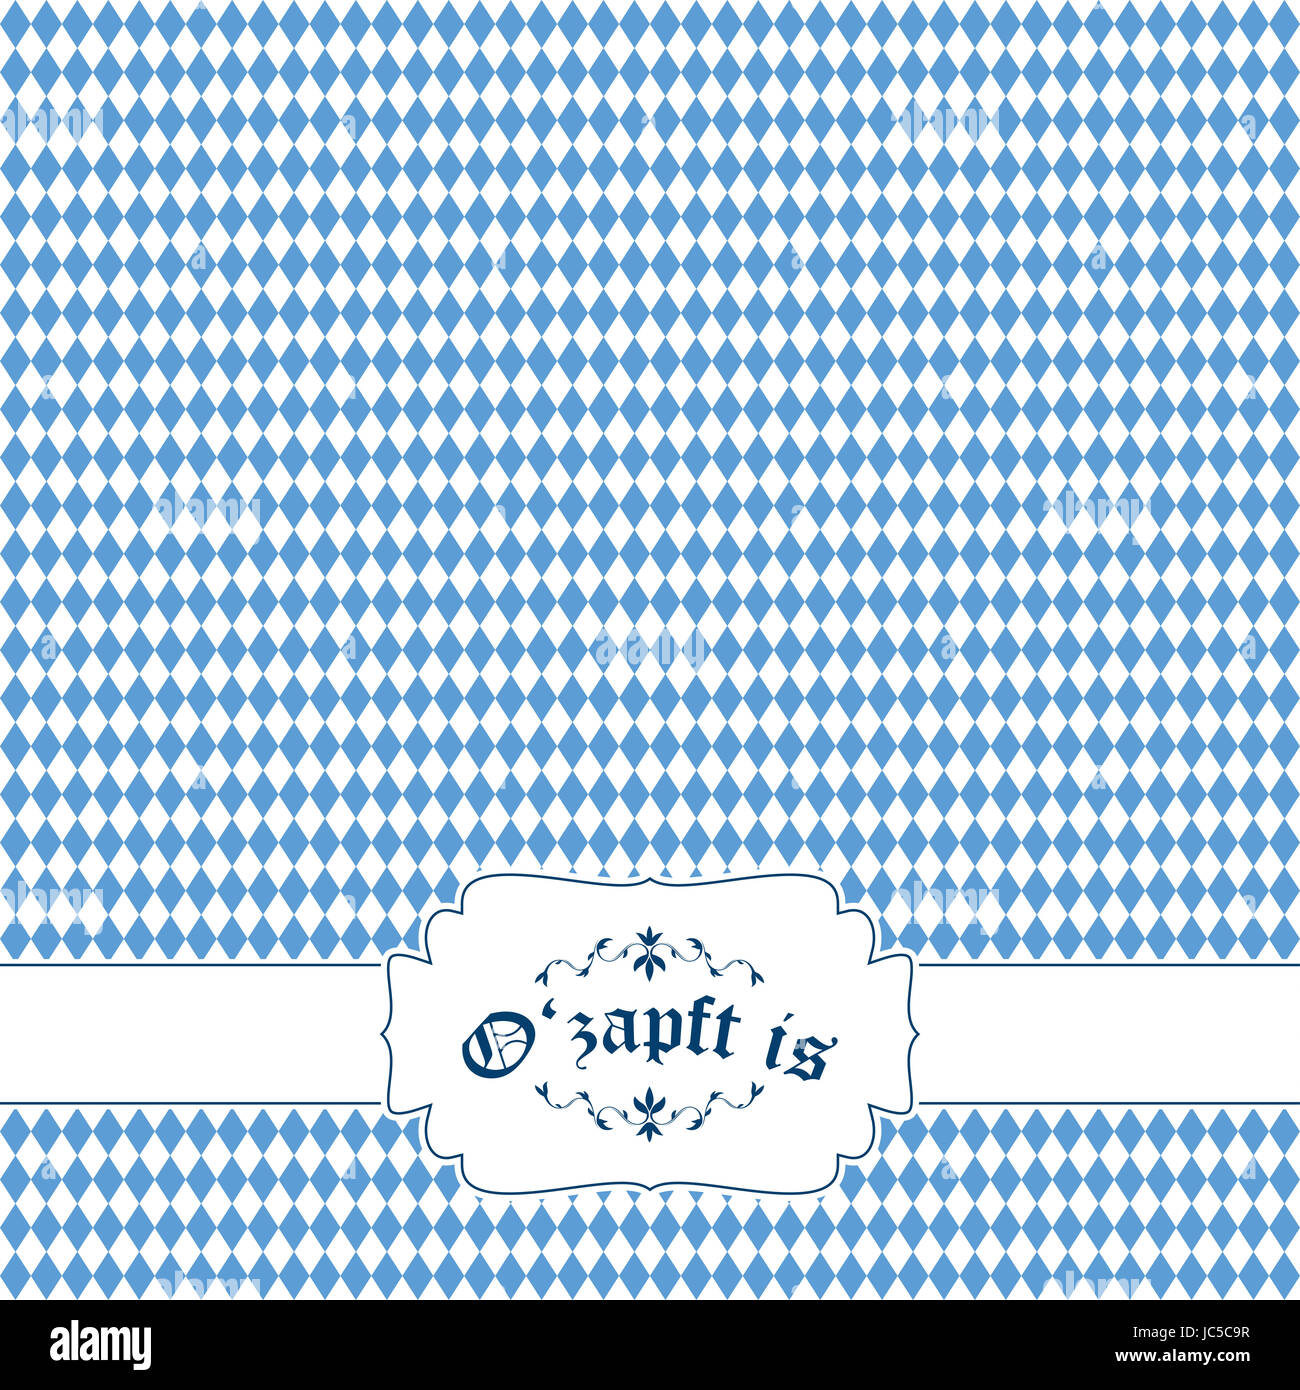 vector of Oktoberfest background with banner and text O'zapft is Stock Photo